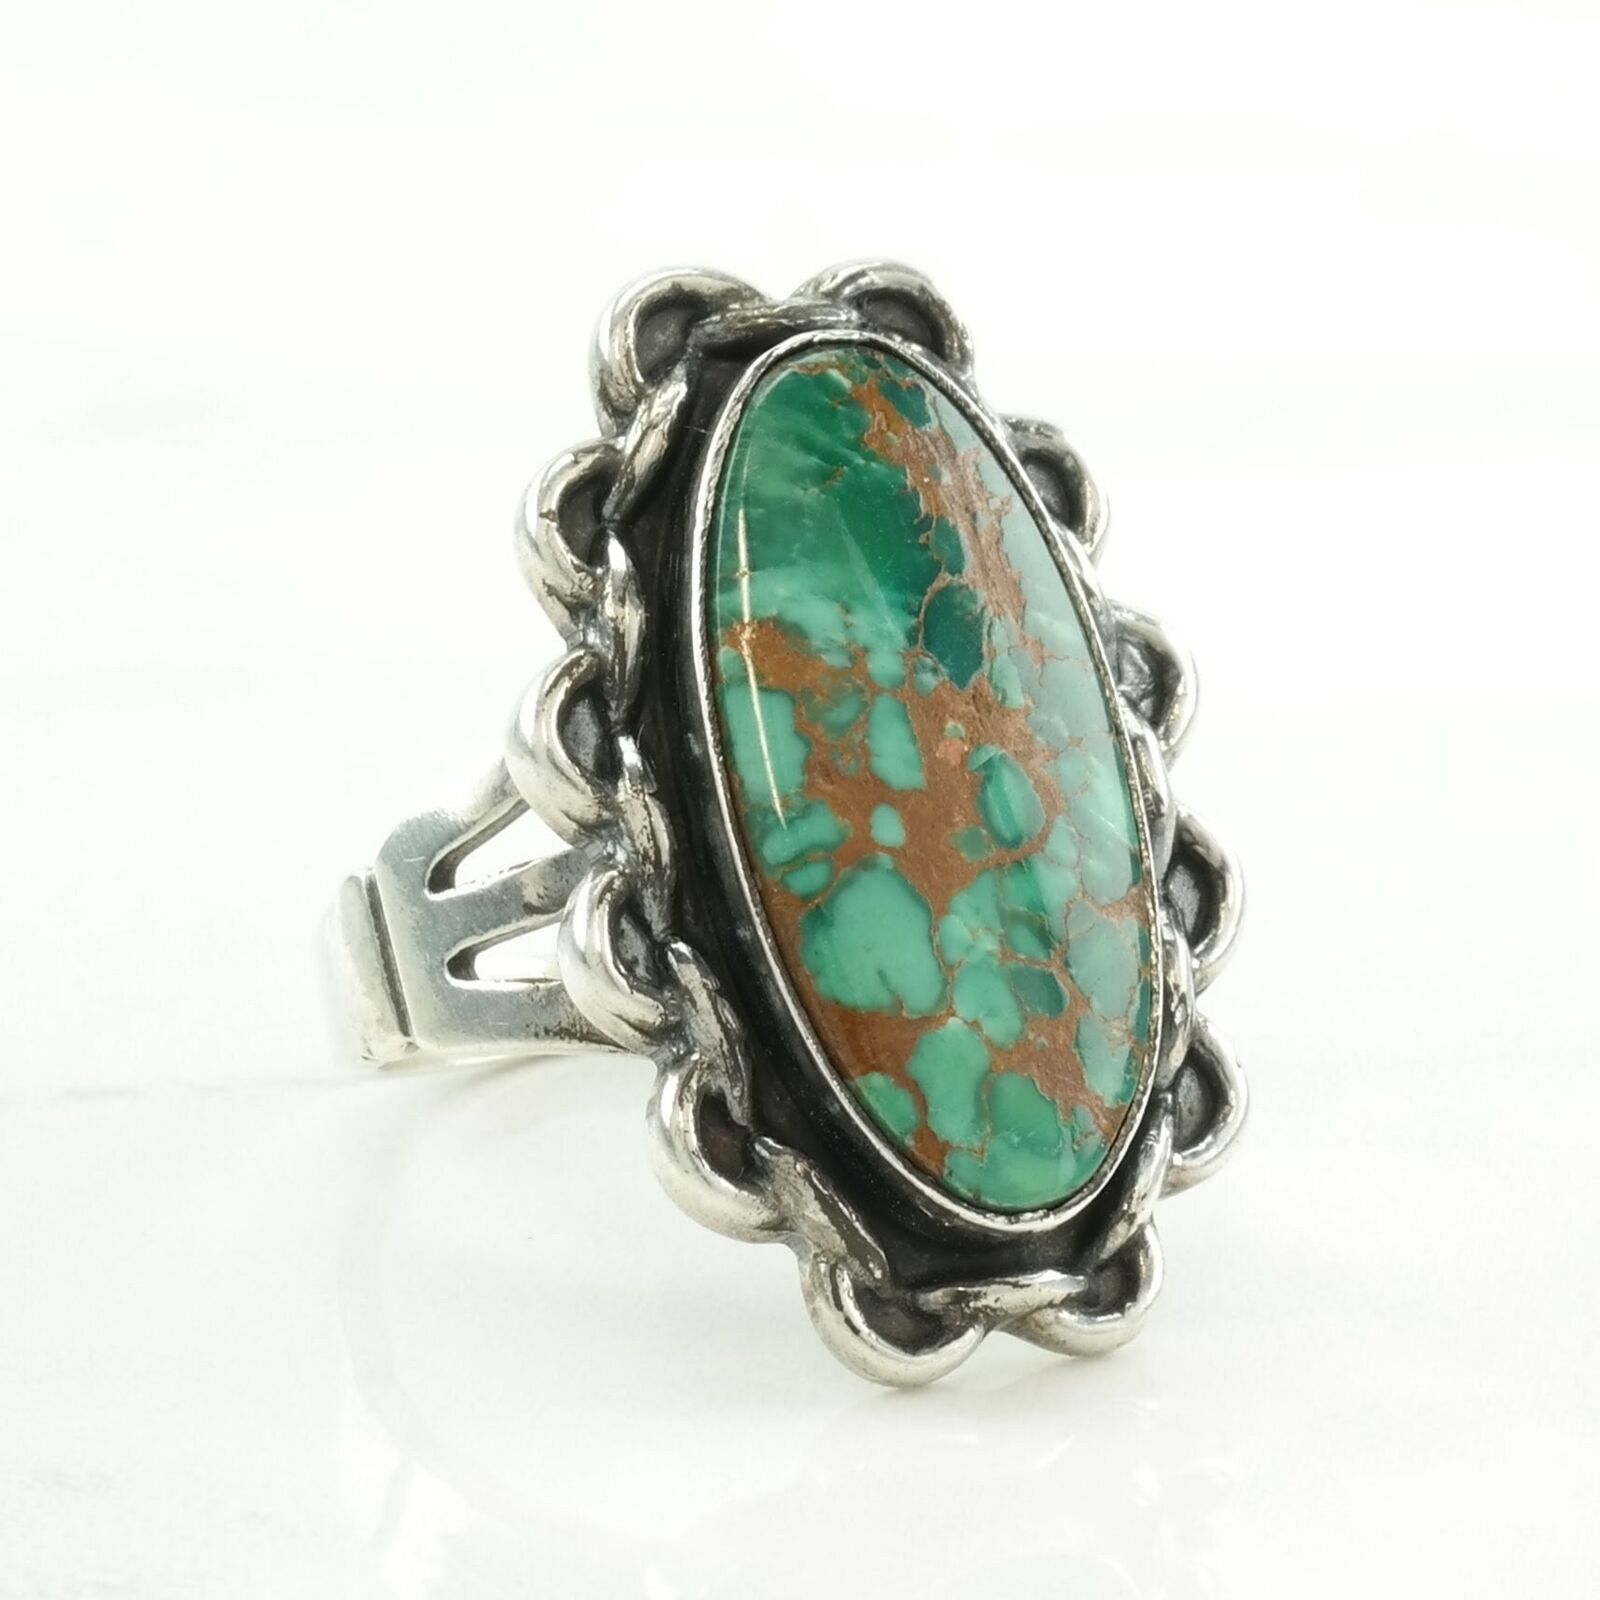 Vintage Native American Silver Ring Turquoise Oval Sterling Size 7 1/4